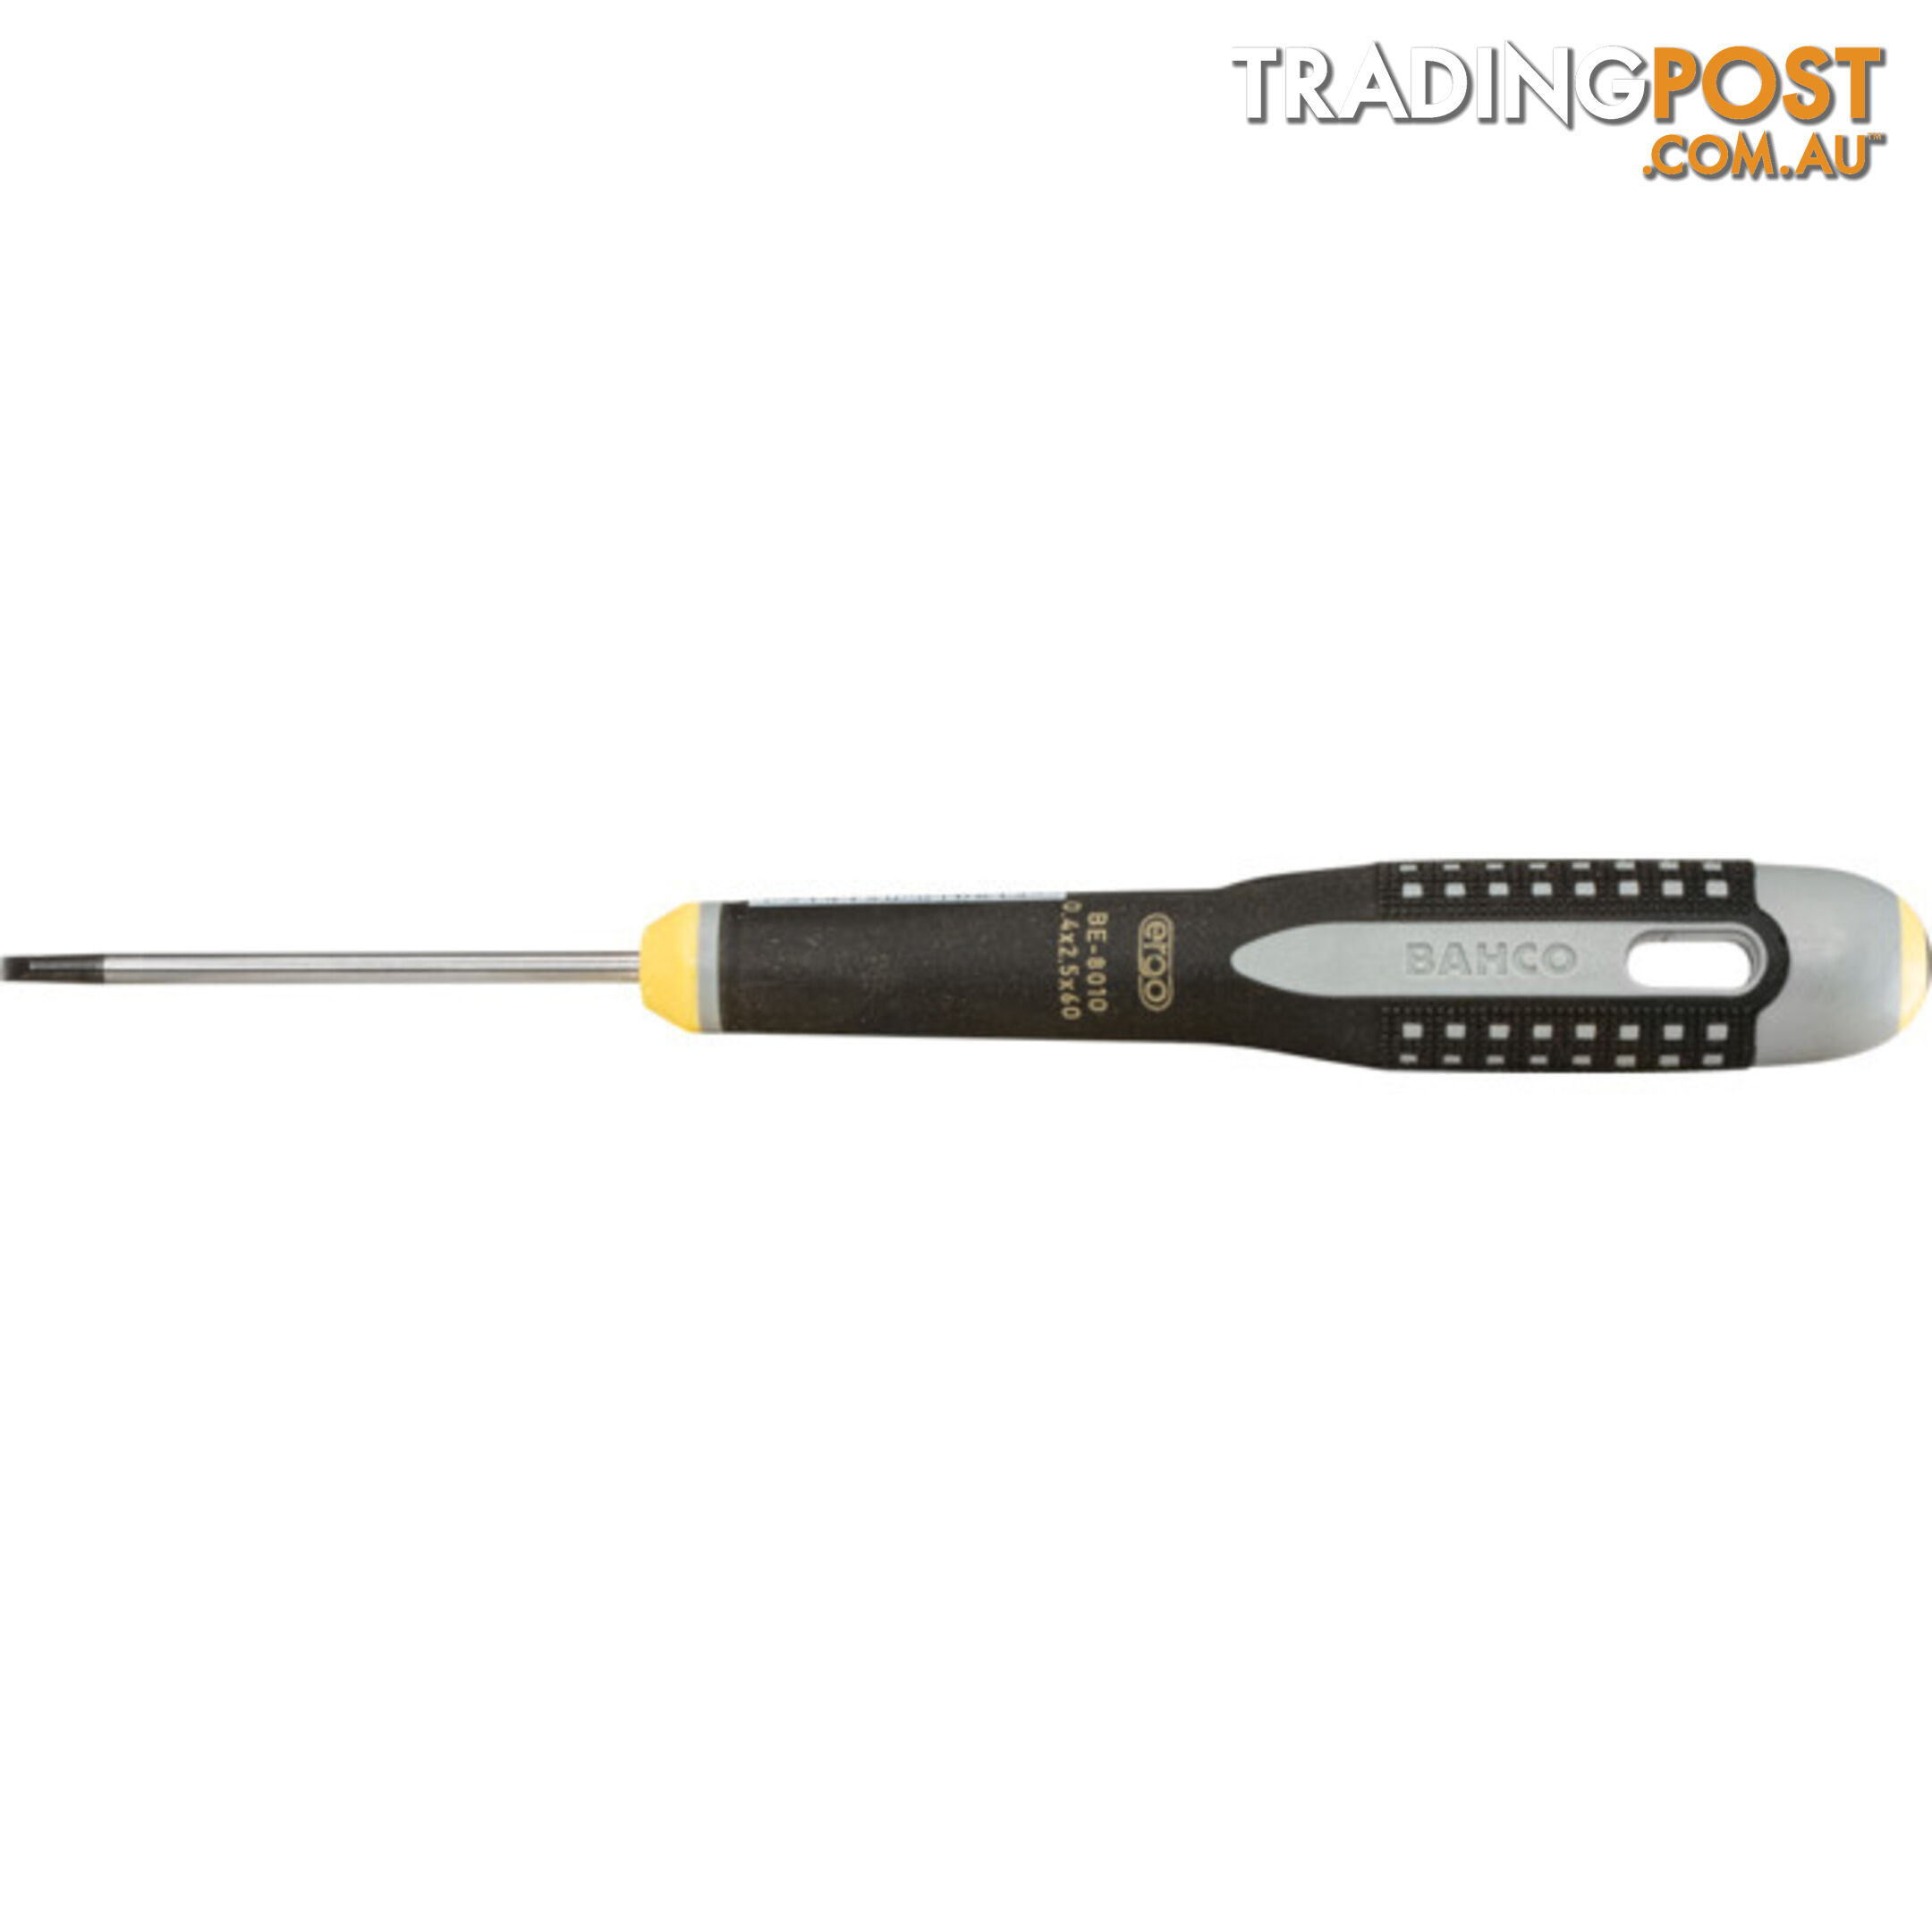 8010SD 150MM FLAT SCREWDRIVER 2.5MM BLADE BAHCO